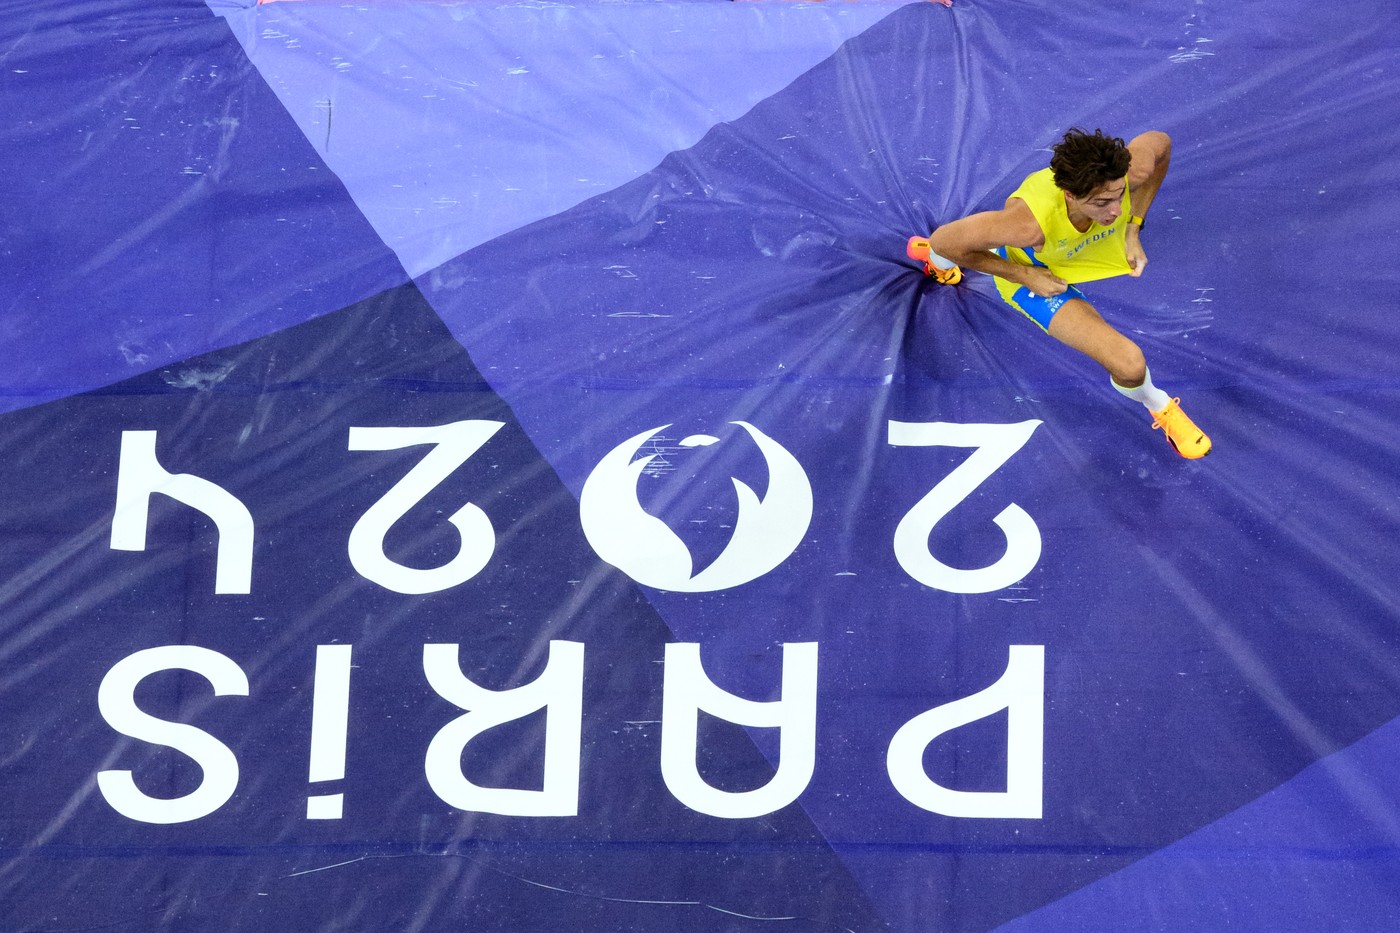 Armand Duplantis of Sweden clears 6,25 meters in men's athletics pole vault final and sets a new world record during day 10 of the Paris 2024 Olympic Games on August 5, 2024 in Paris.
Paris 2024 Olympics, Day 10, Athletics, France - 05 Aug 2024,Image: 896315063, License: Rights-managed, Restrictions: , Model Release: no